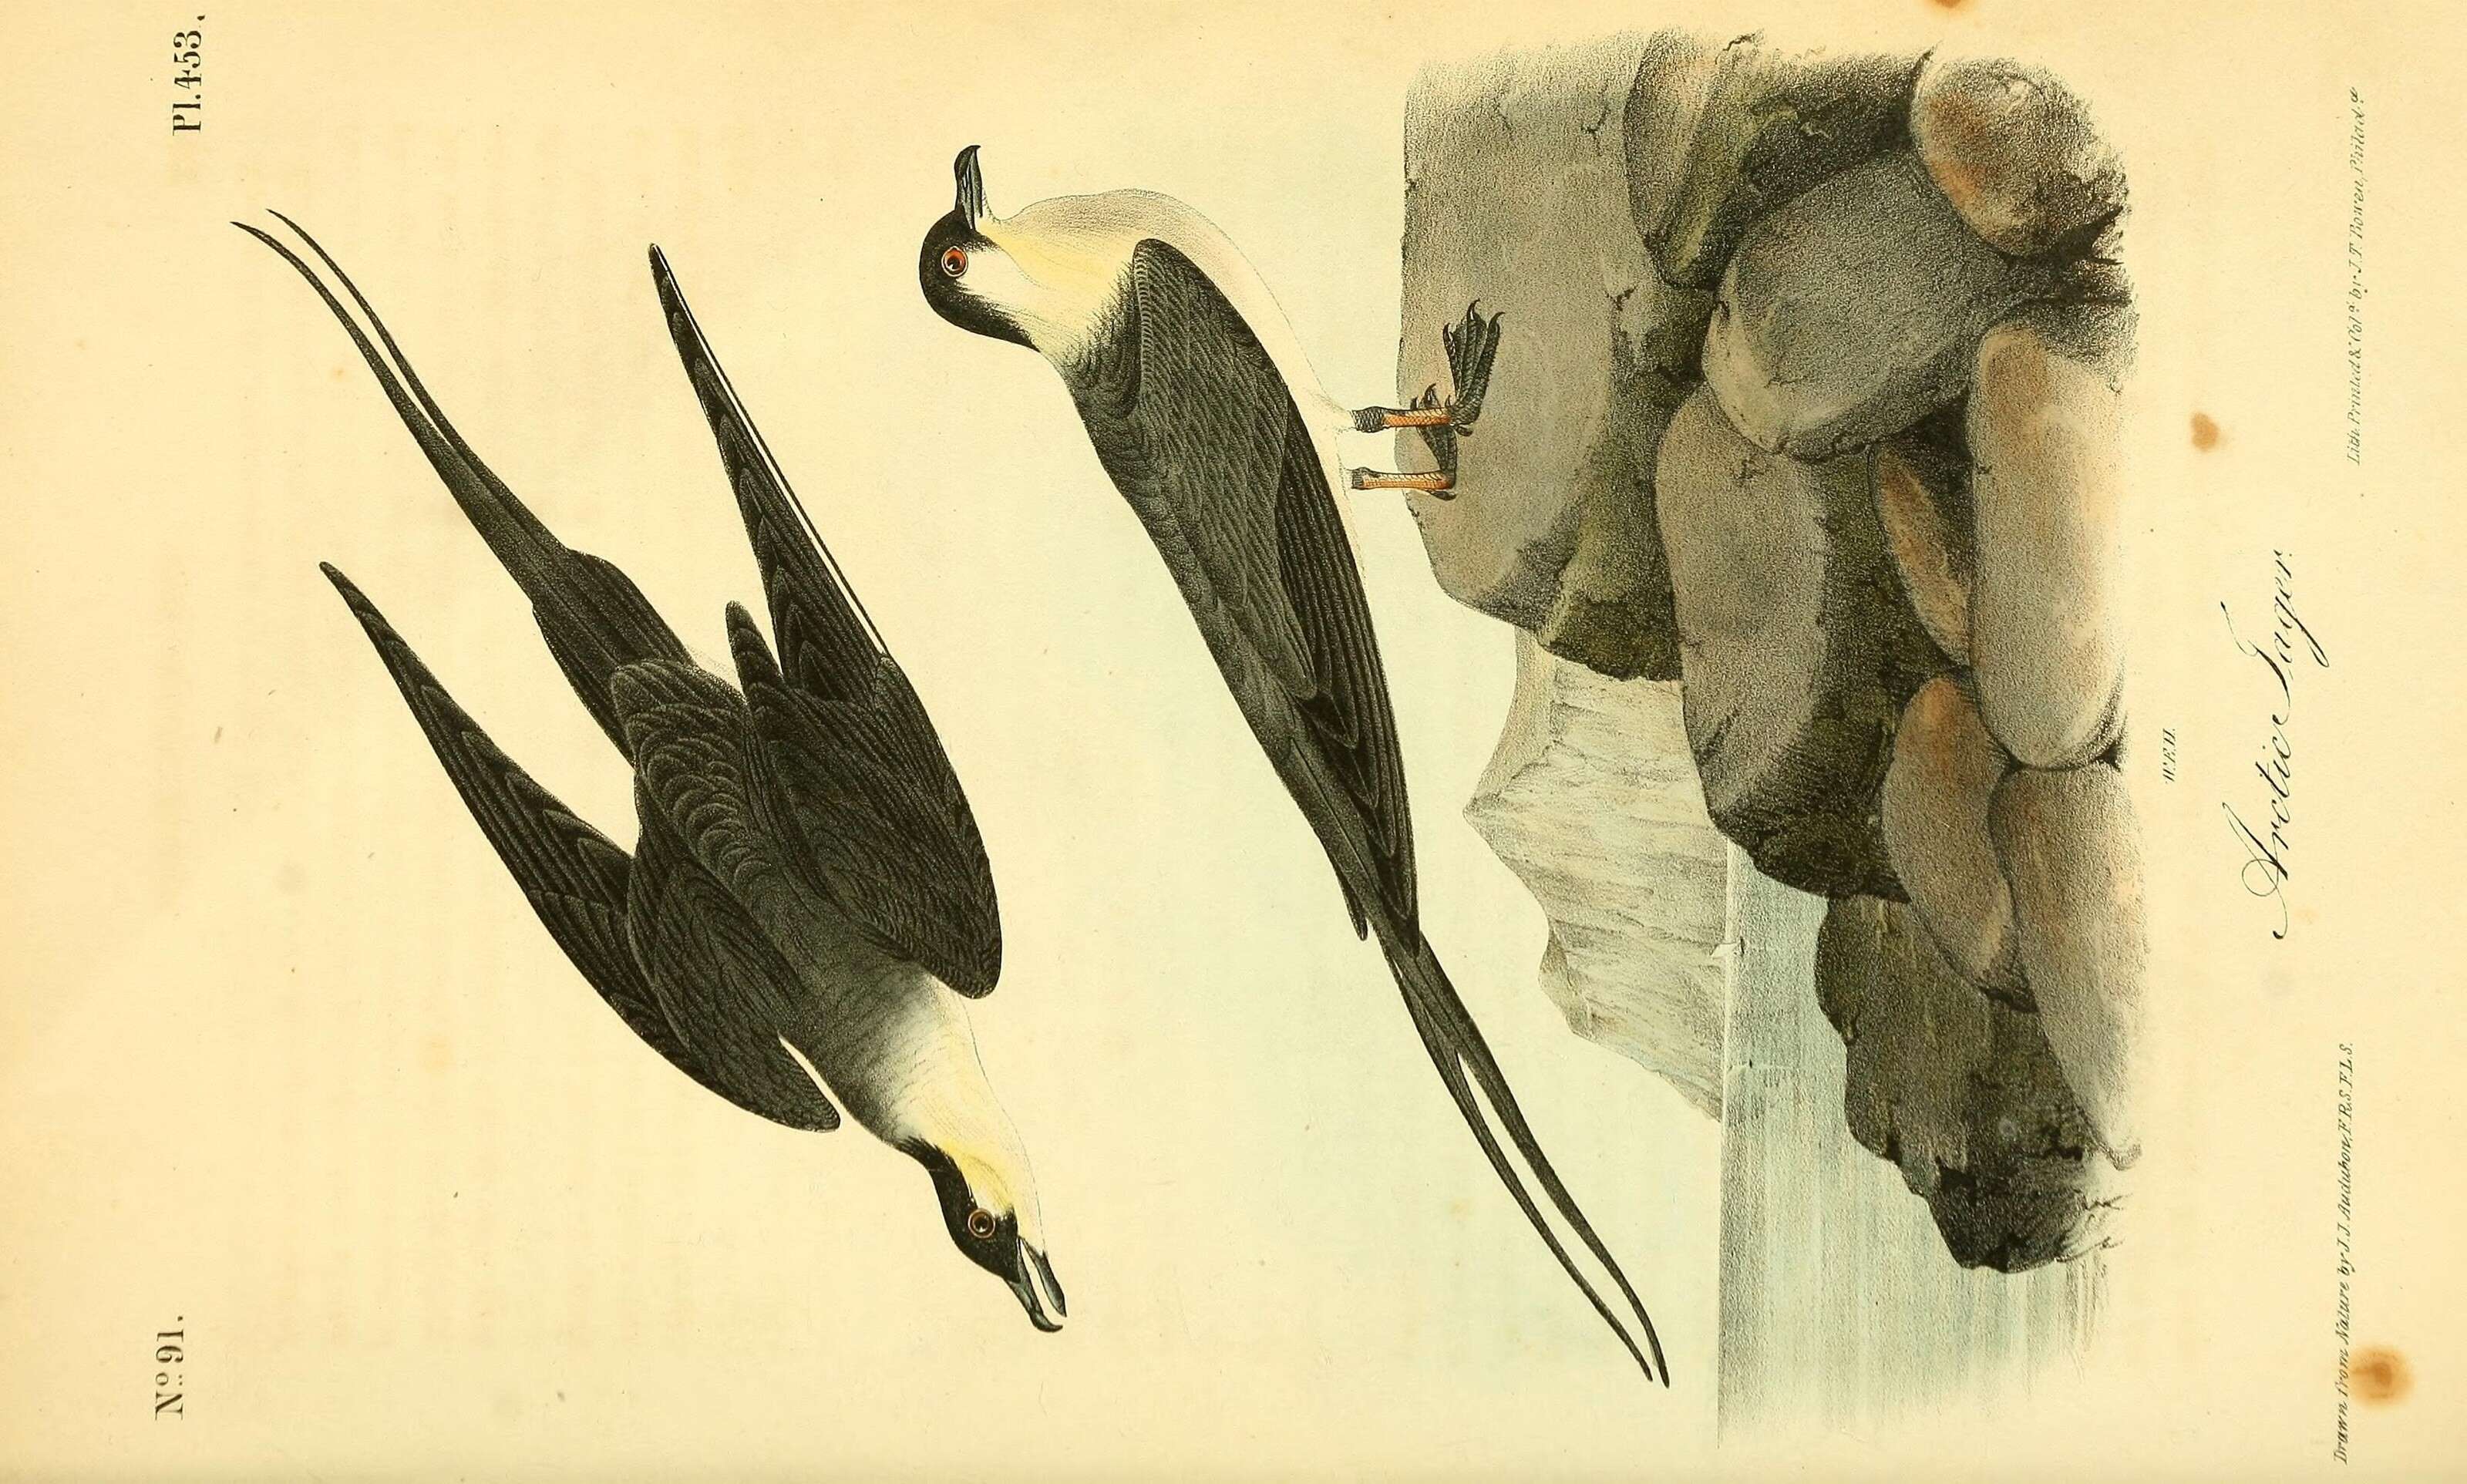 Image of Long-tailed Jaeger